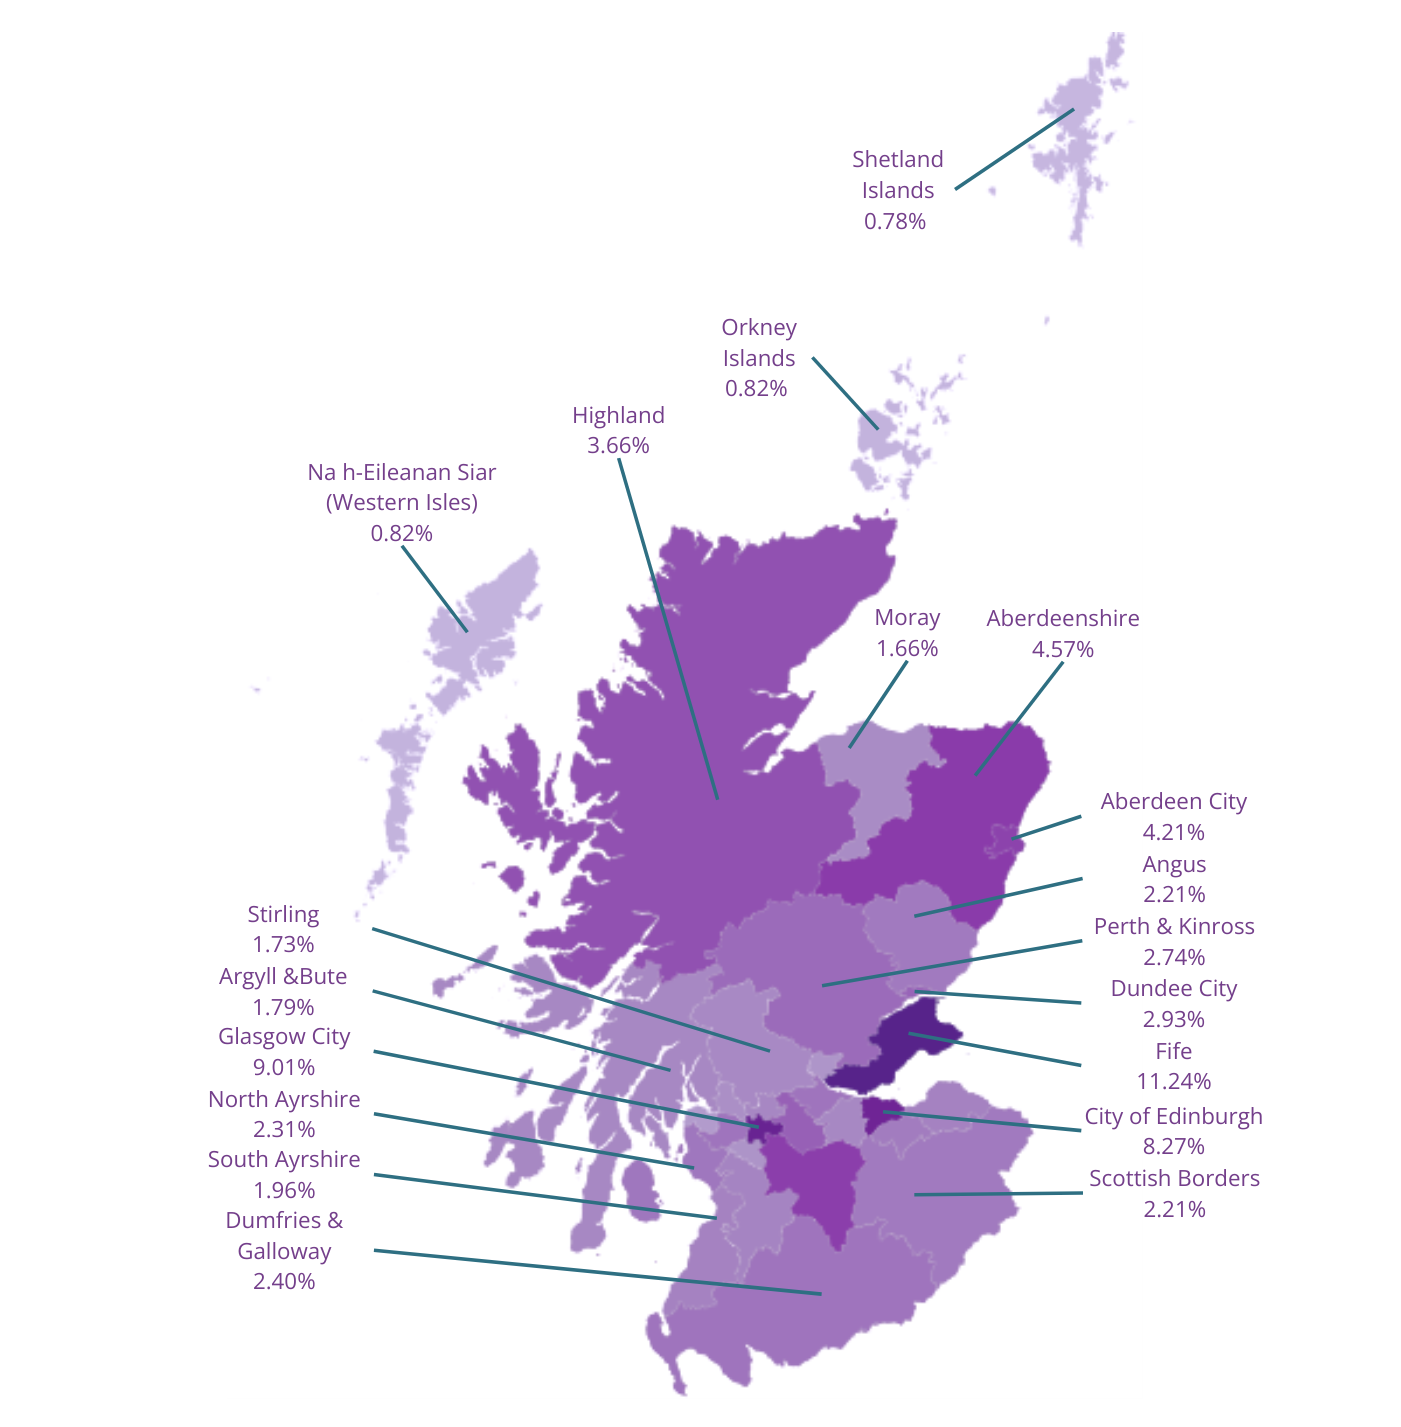 Map of Scotland showing the percentage of Let's Be Heard submissions by locality.